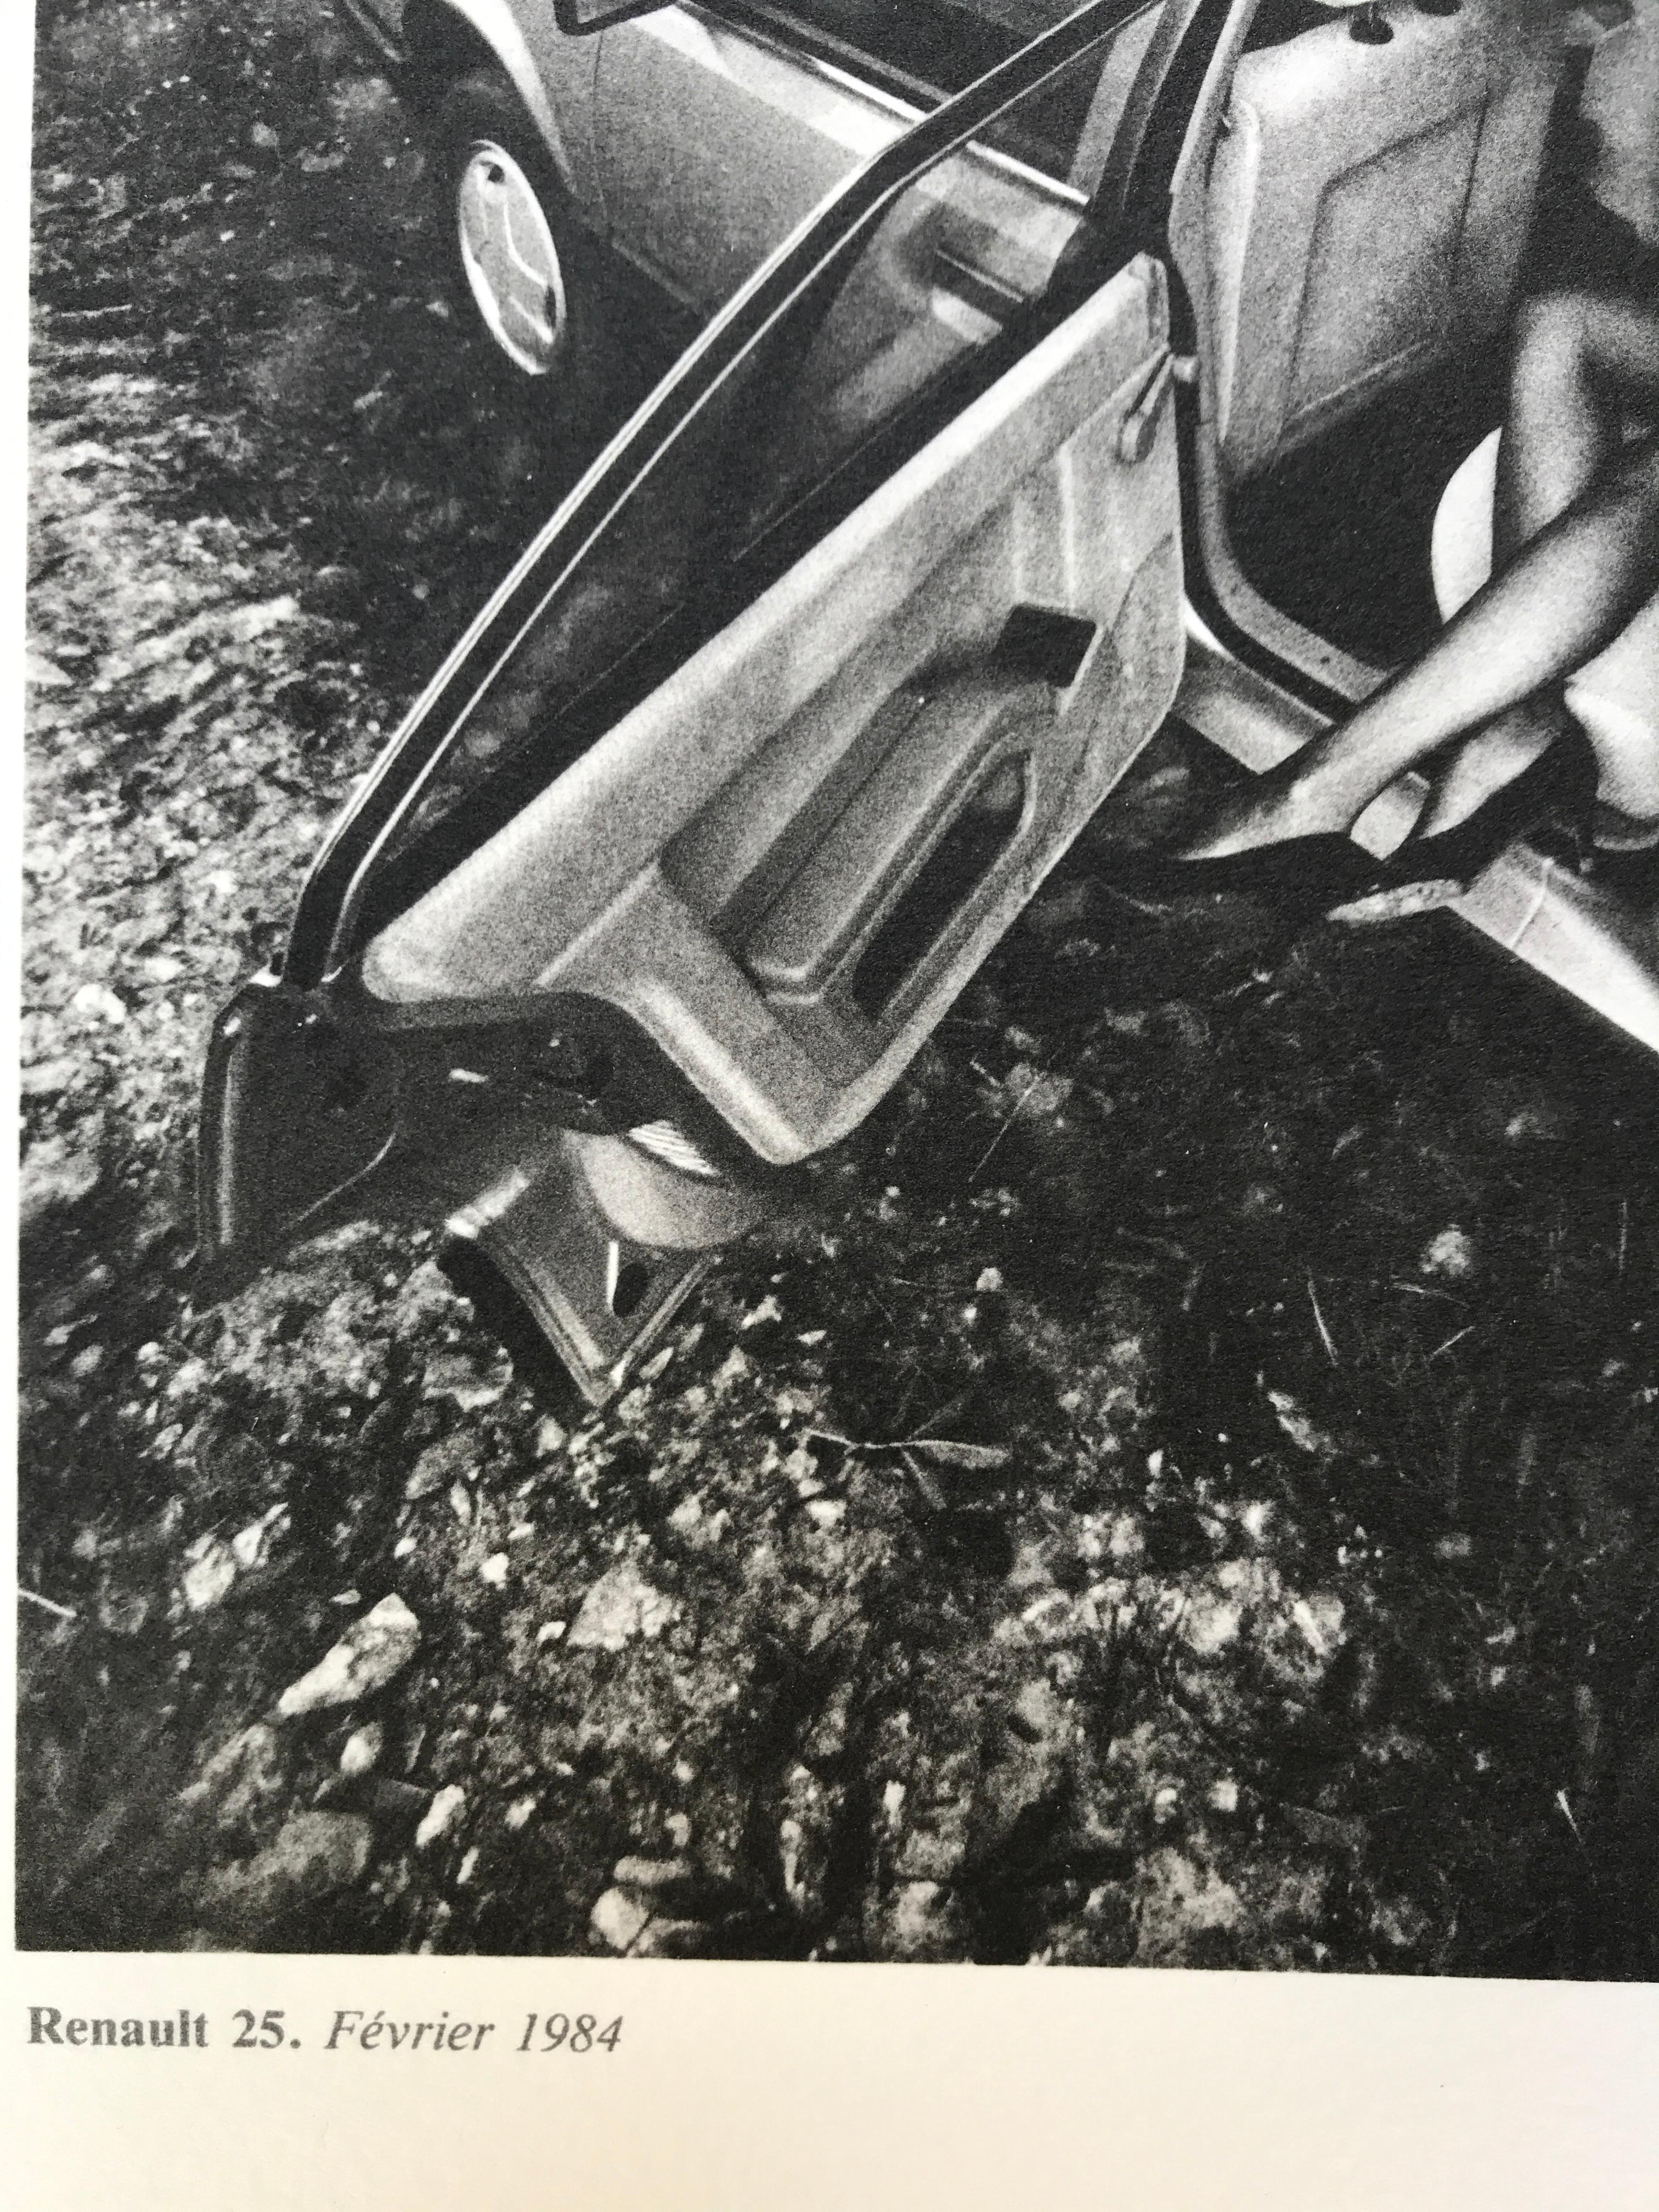 Jeanloup Sieff 's Renault 25 